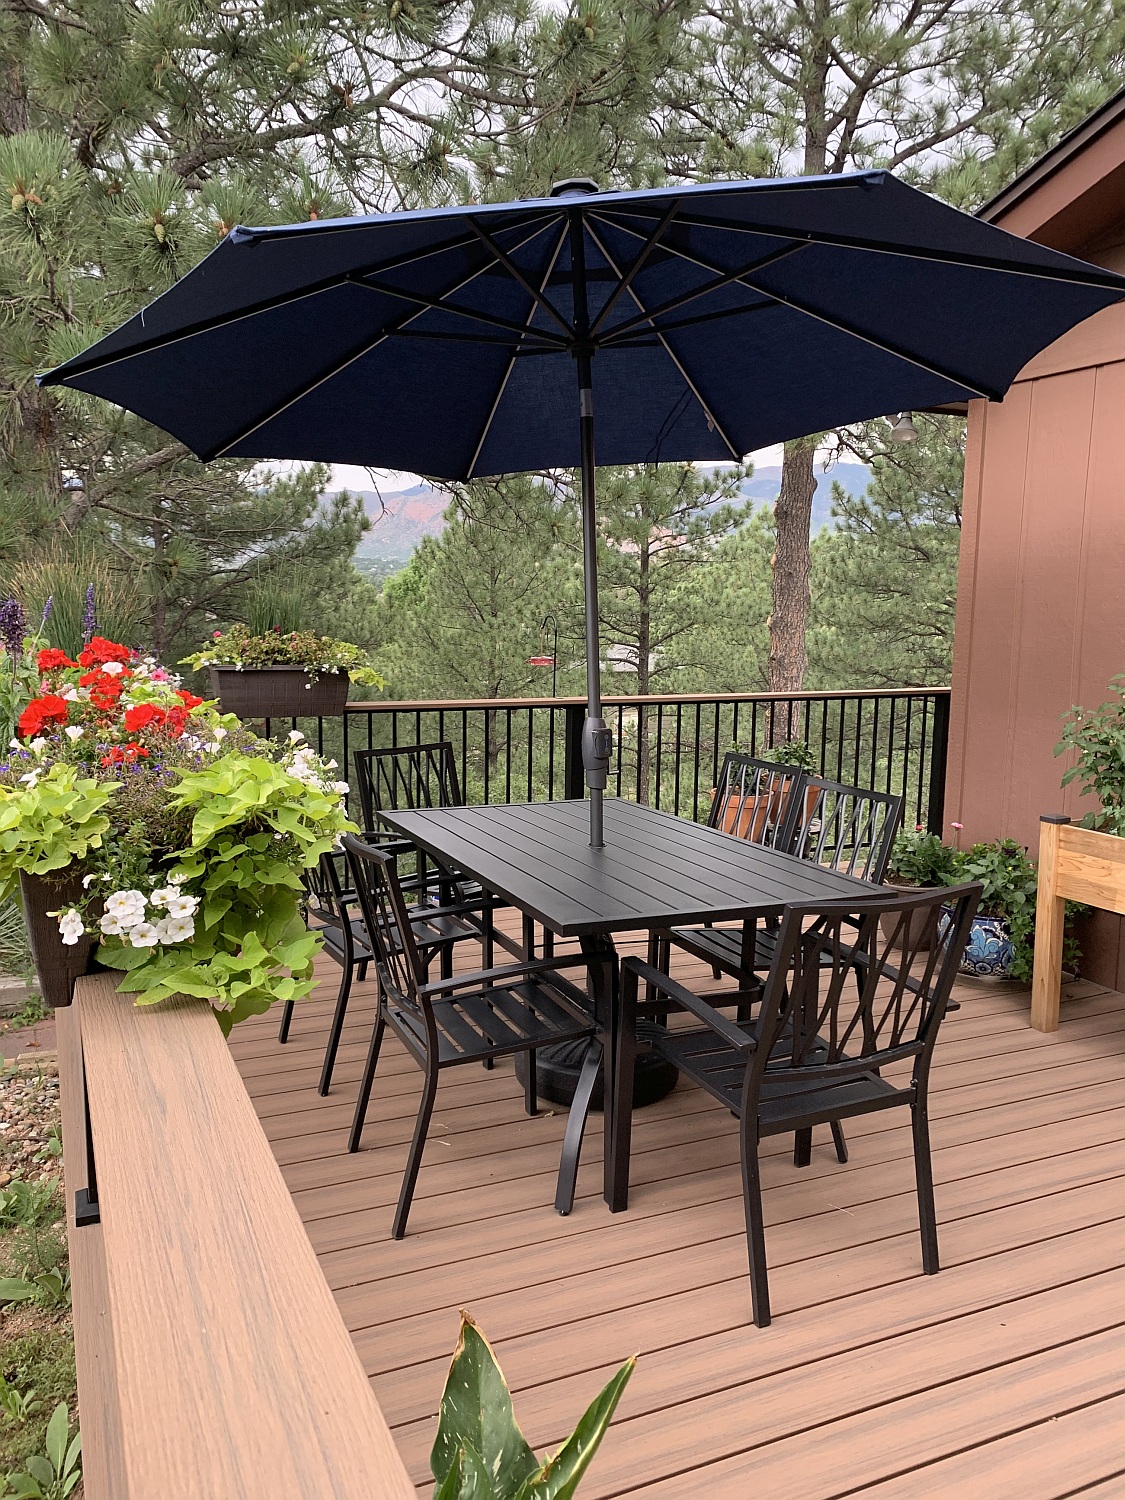 A composite deck with black metal railing that creates a beautiful, outdoor oasis for the owners.